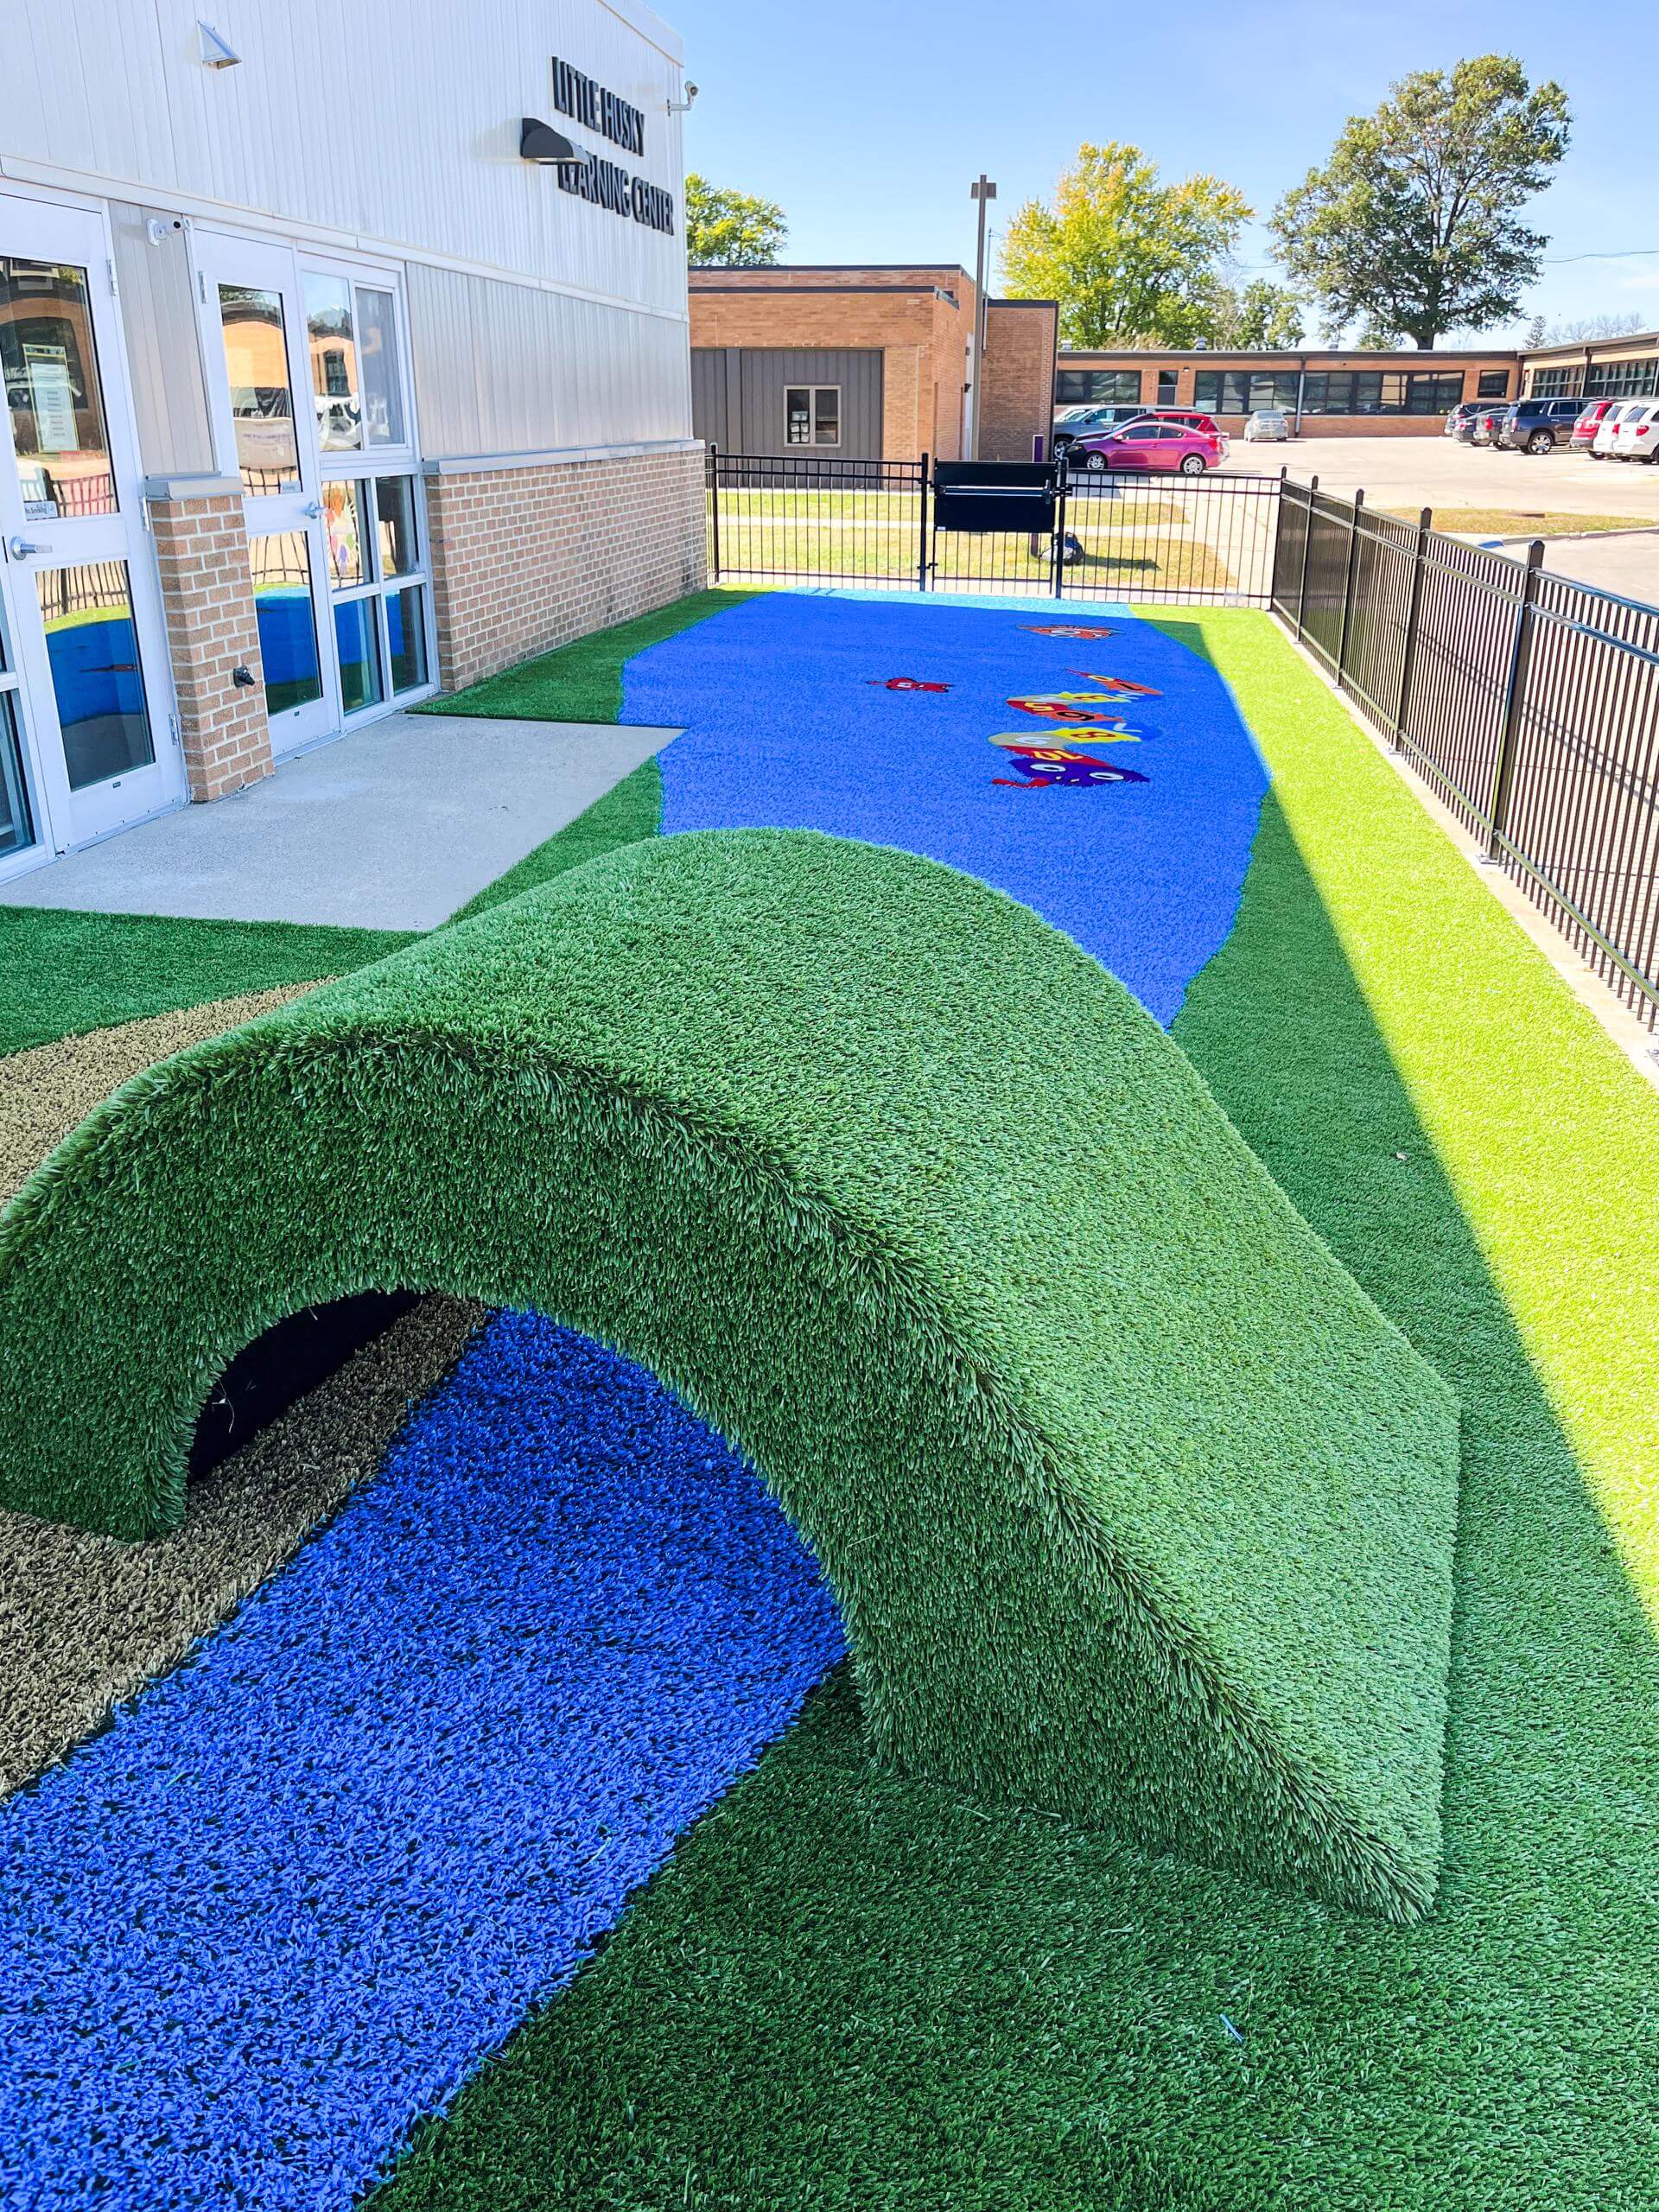 Colorful tunnel entrance on a playground with blue synthetic stream and green turf hills.